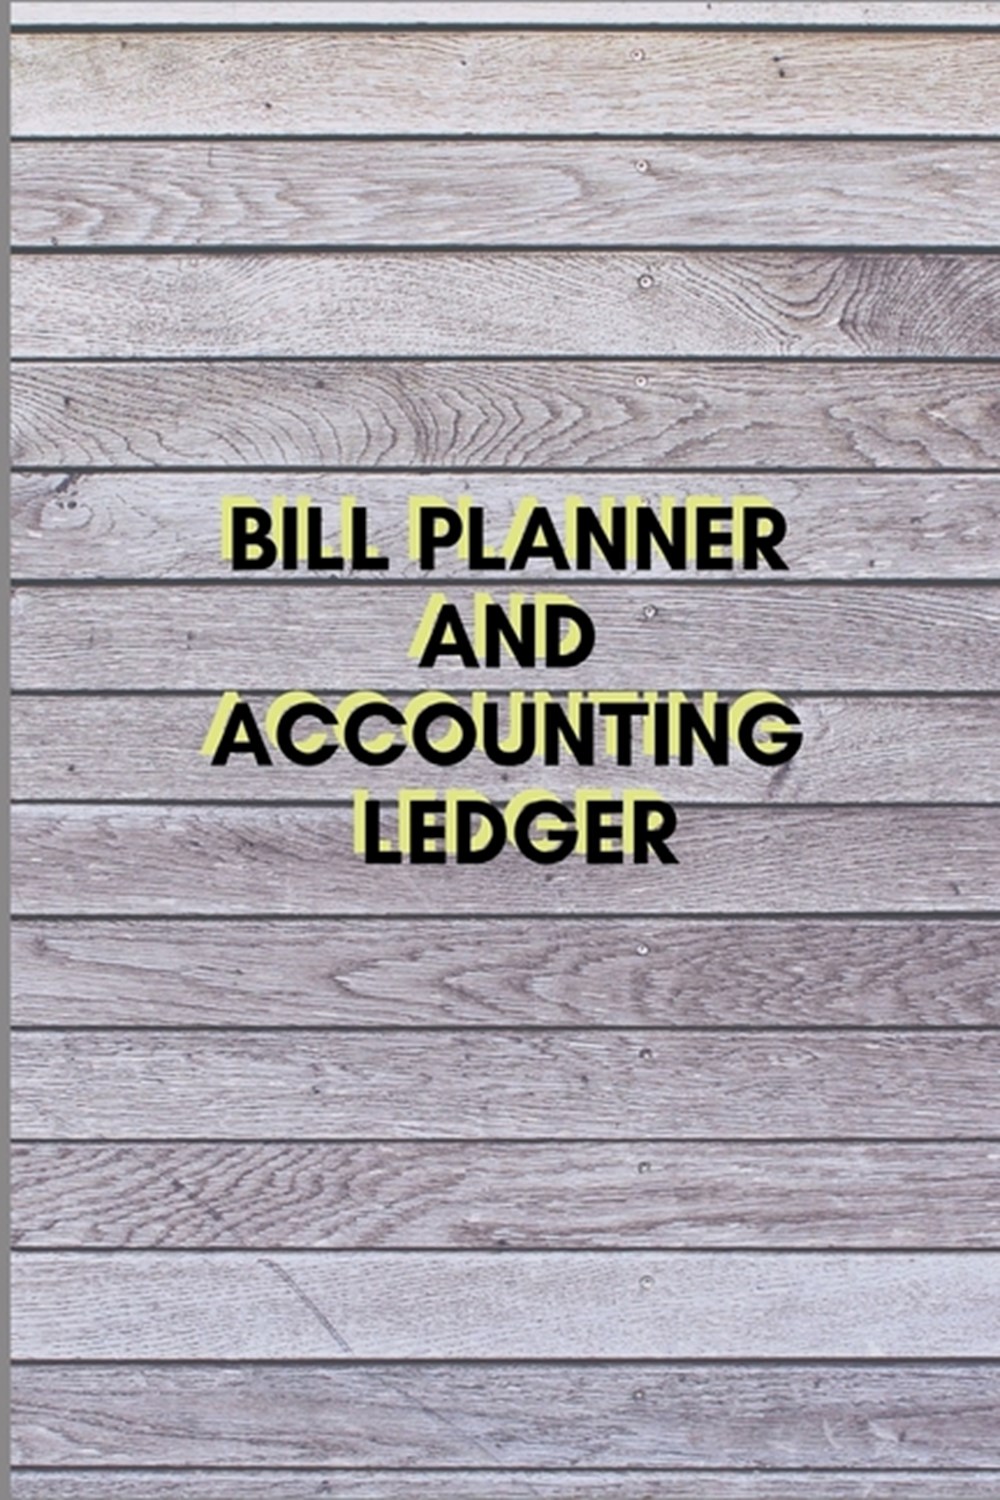 Bill Planner and Accounting Ledger Simple Balance sheet or Cash Book Accounts Bookkeeping Journal fo